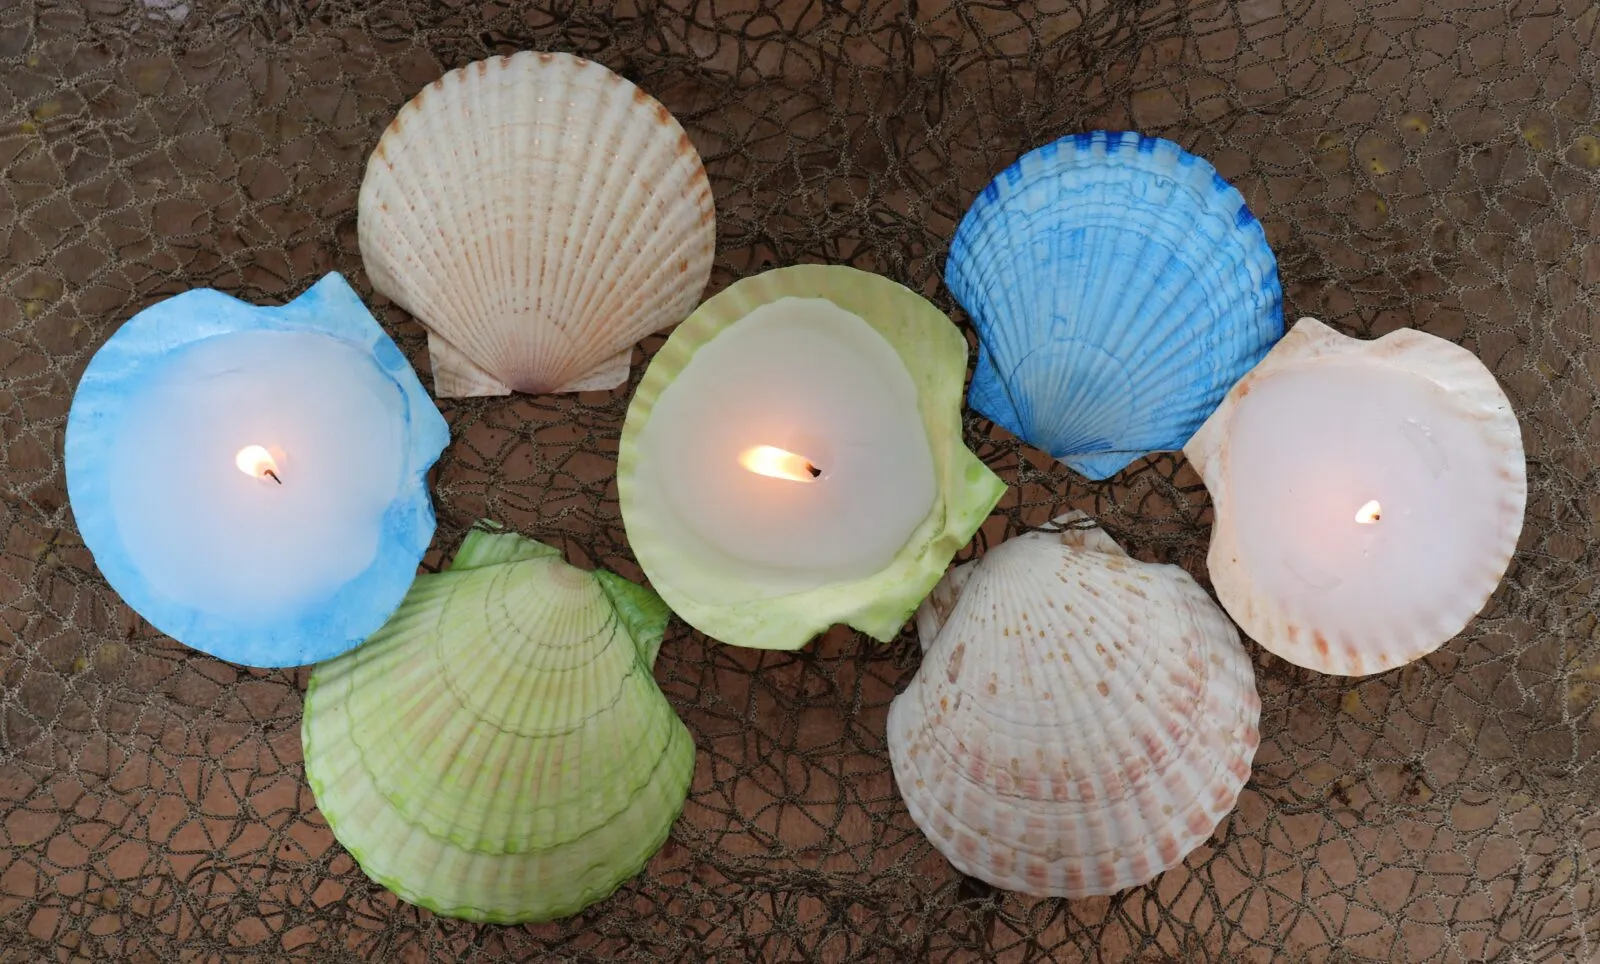 How To Make Candles With Shells In Them